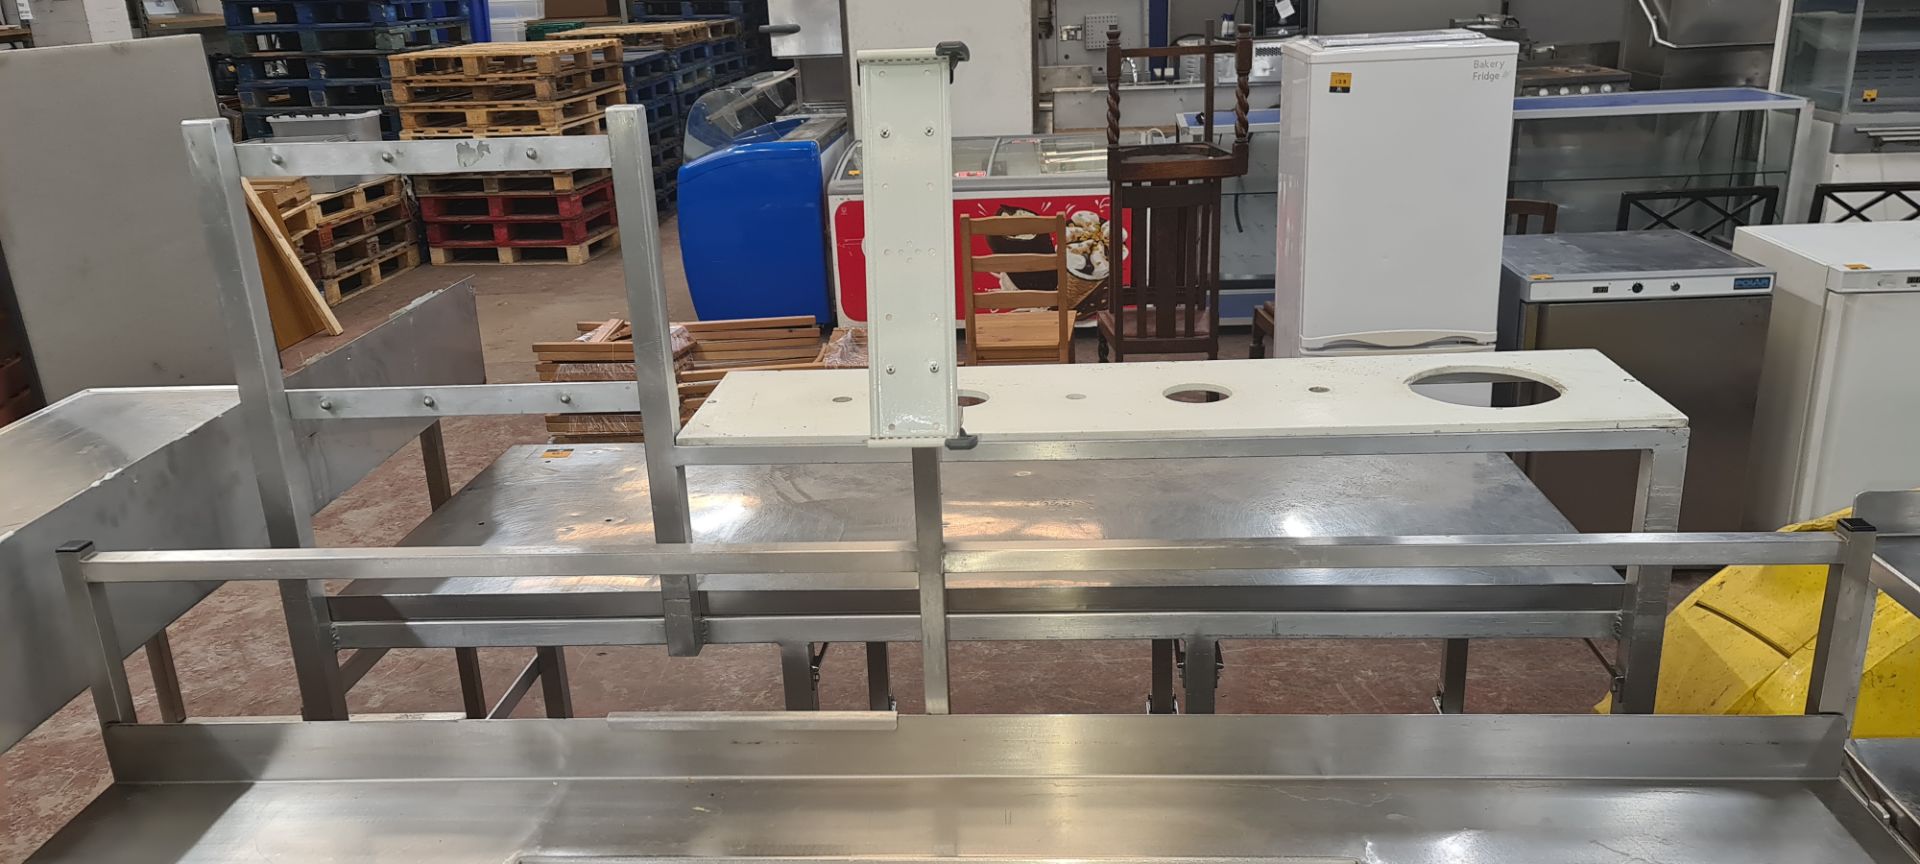 Large stainless steel multi-tier table with draining section - Image 3 of 7